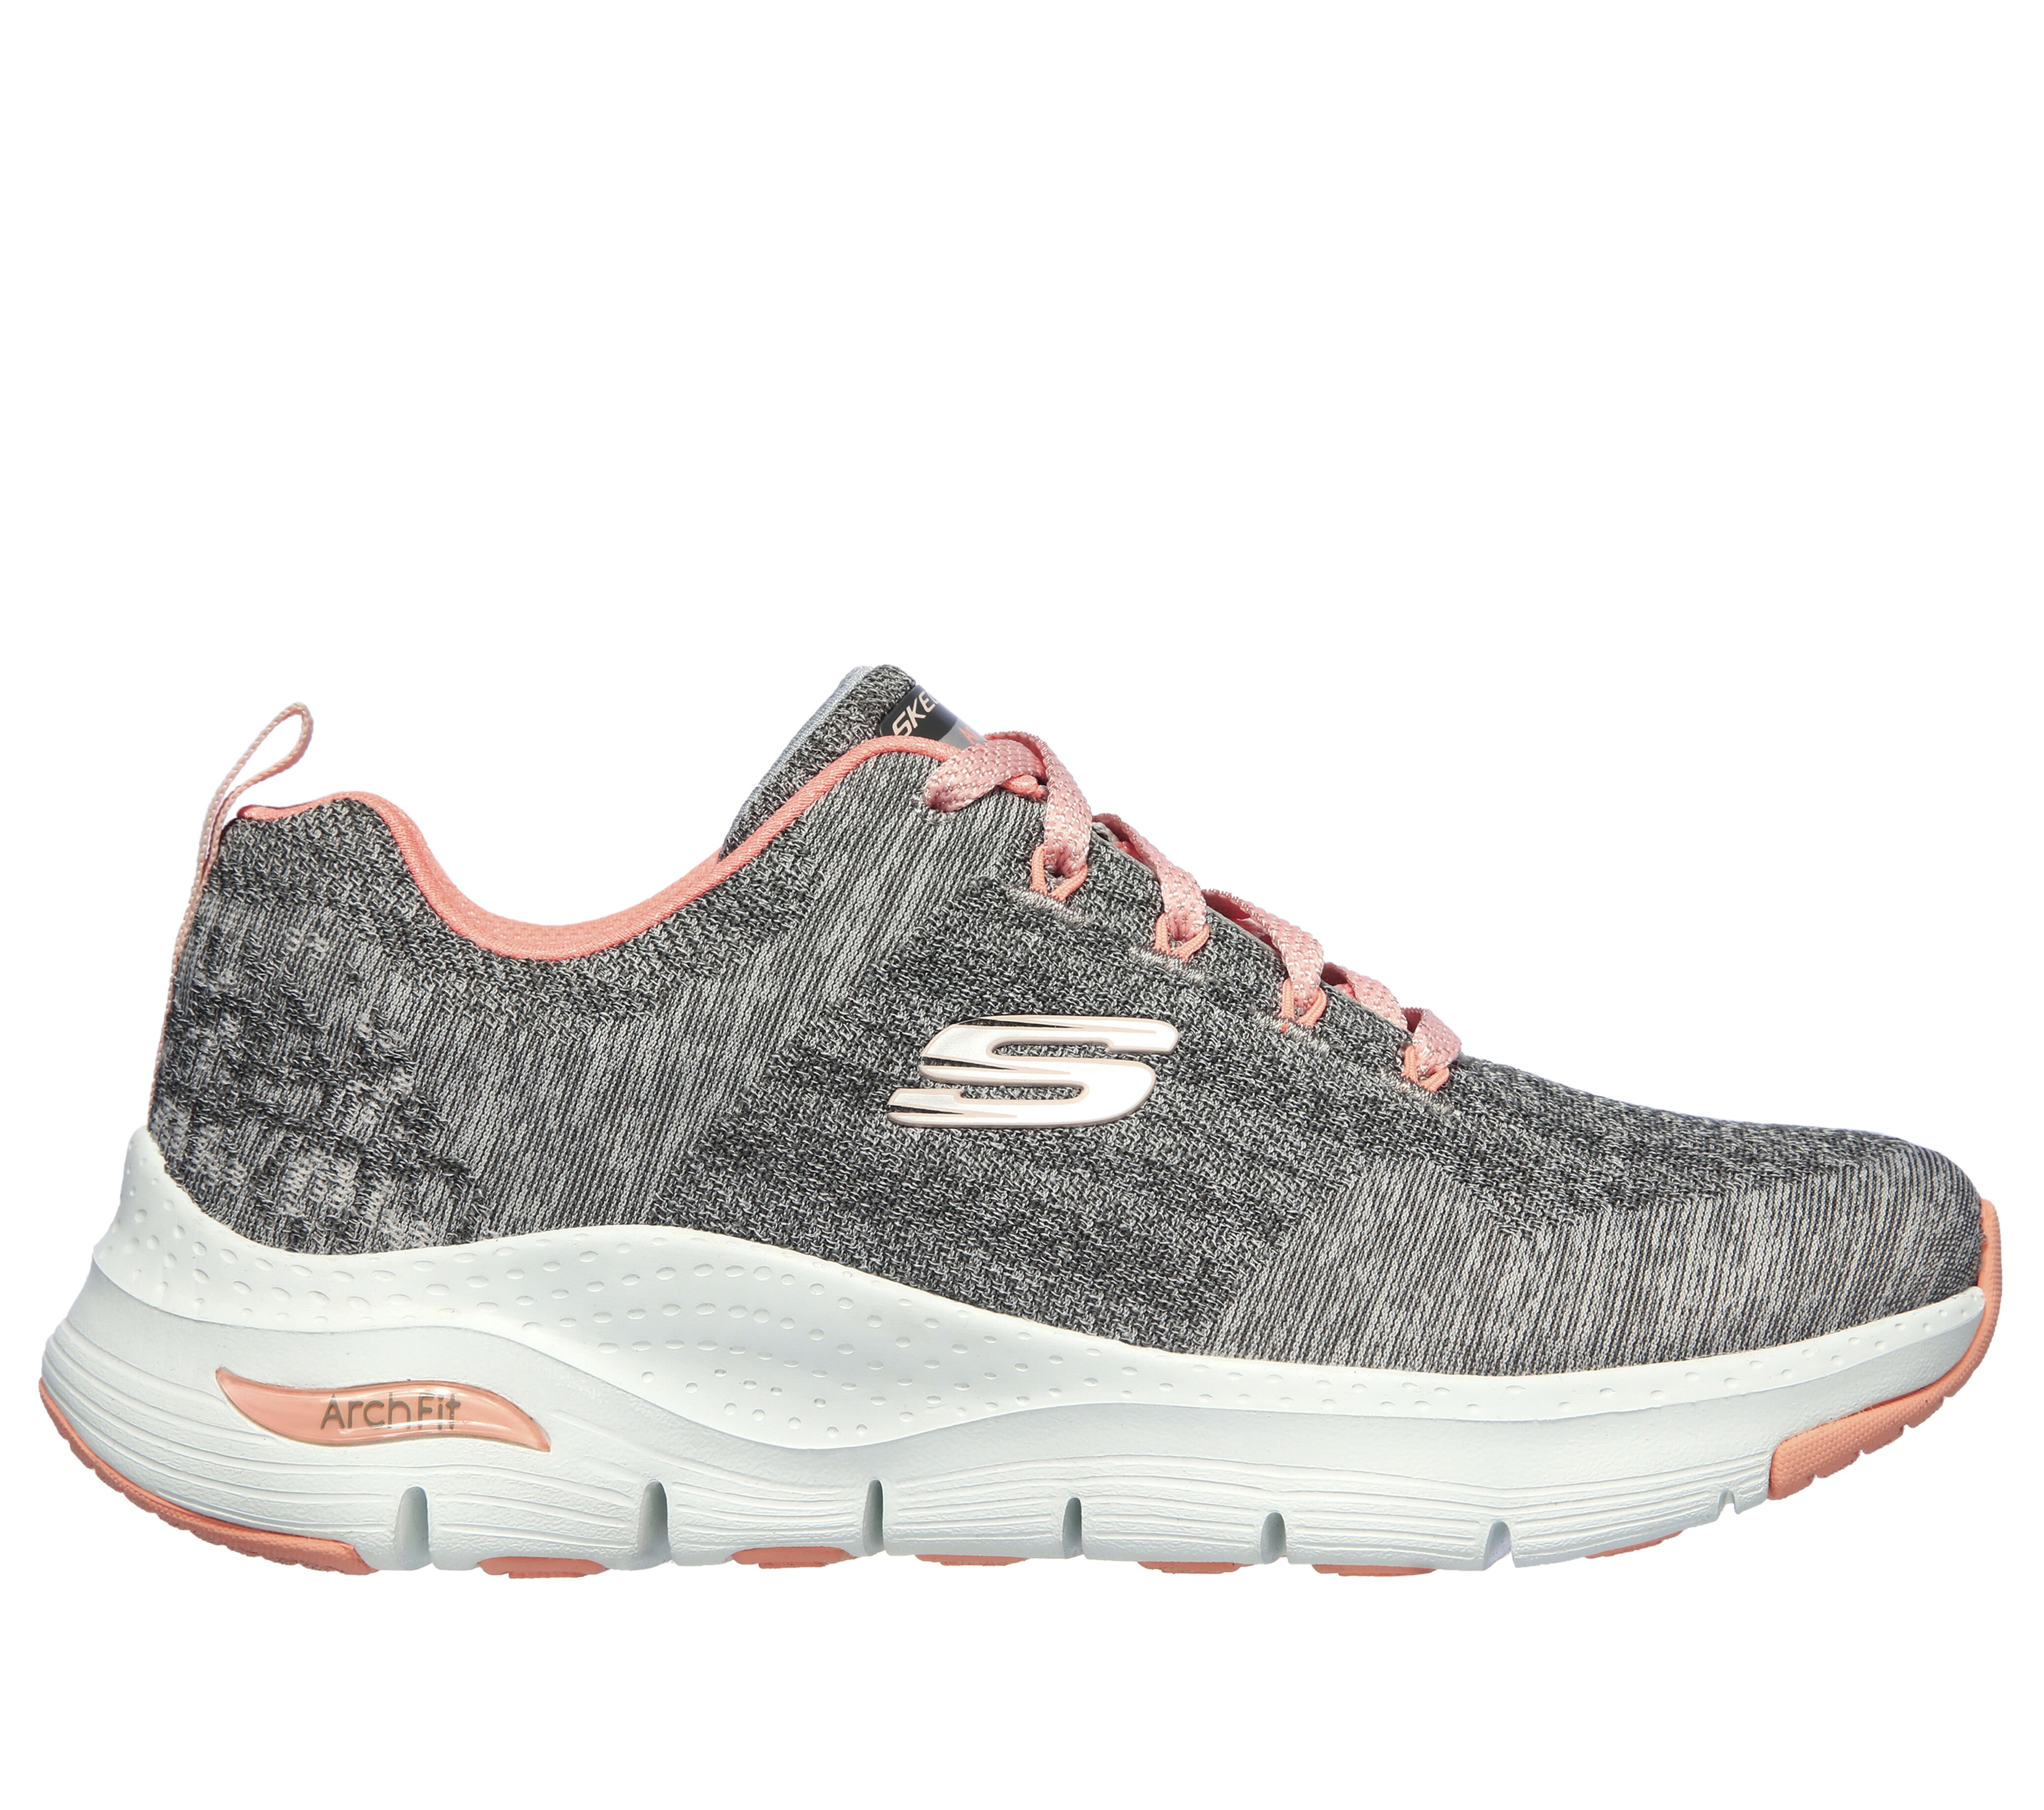 skechers running shoes canada